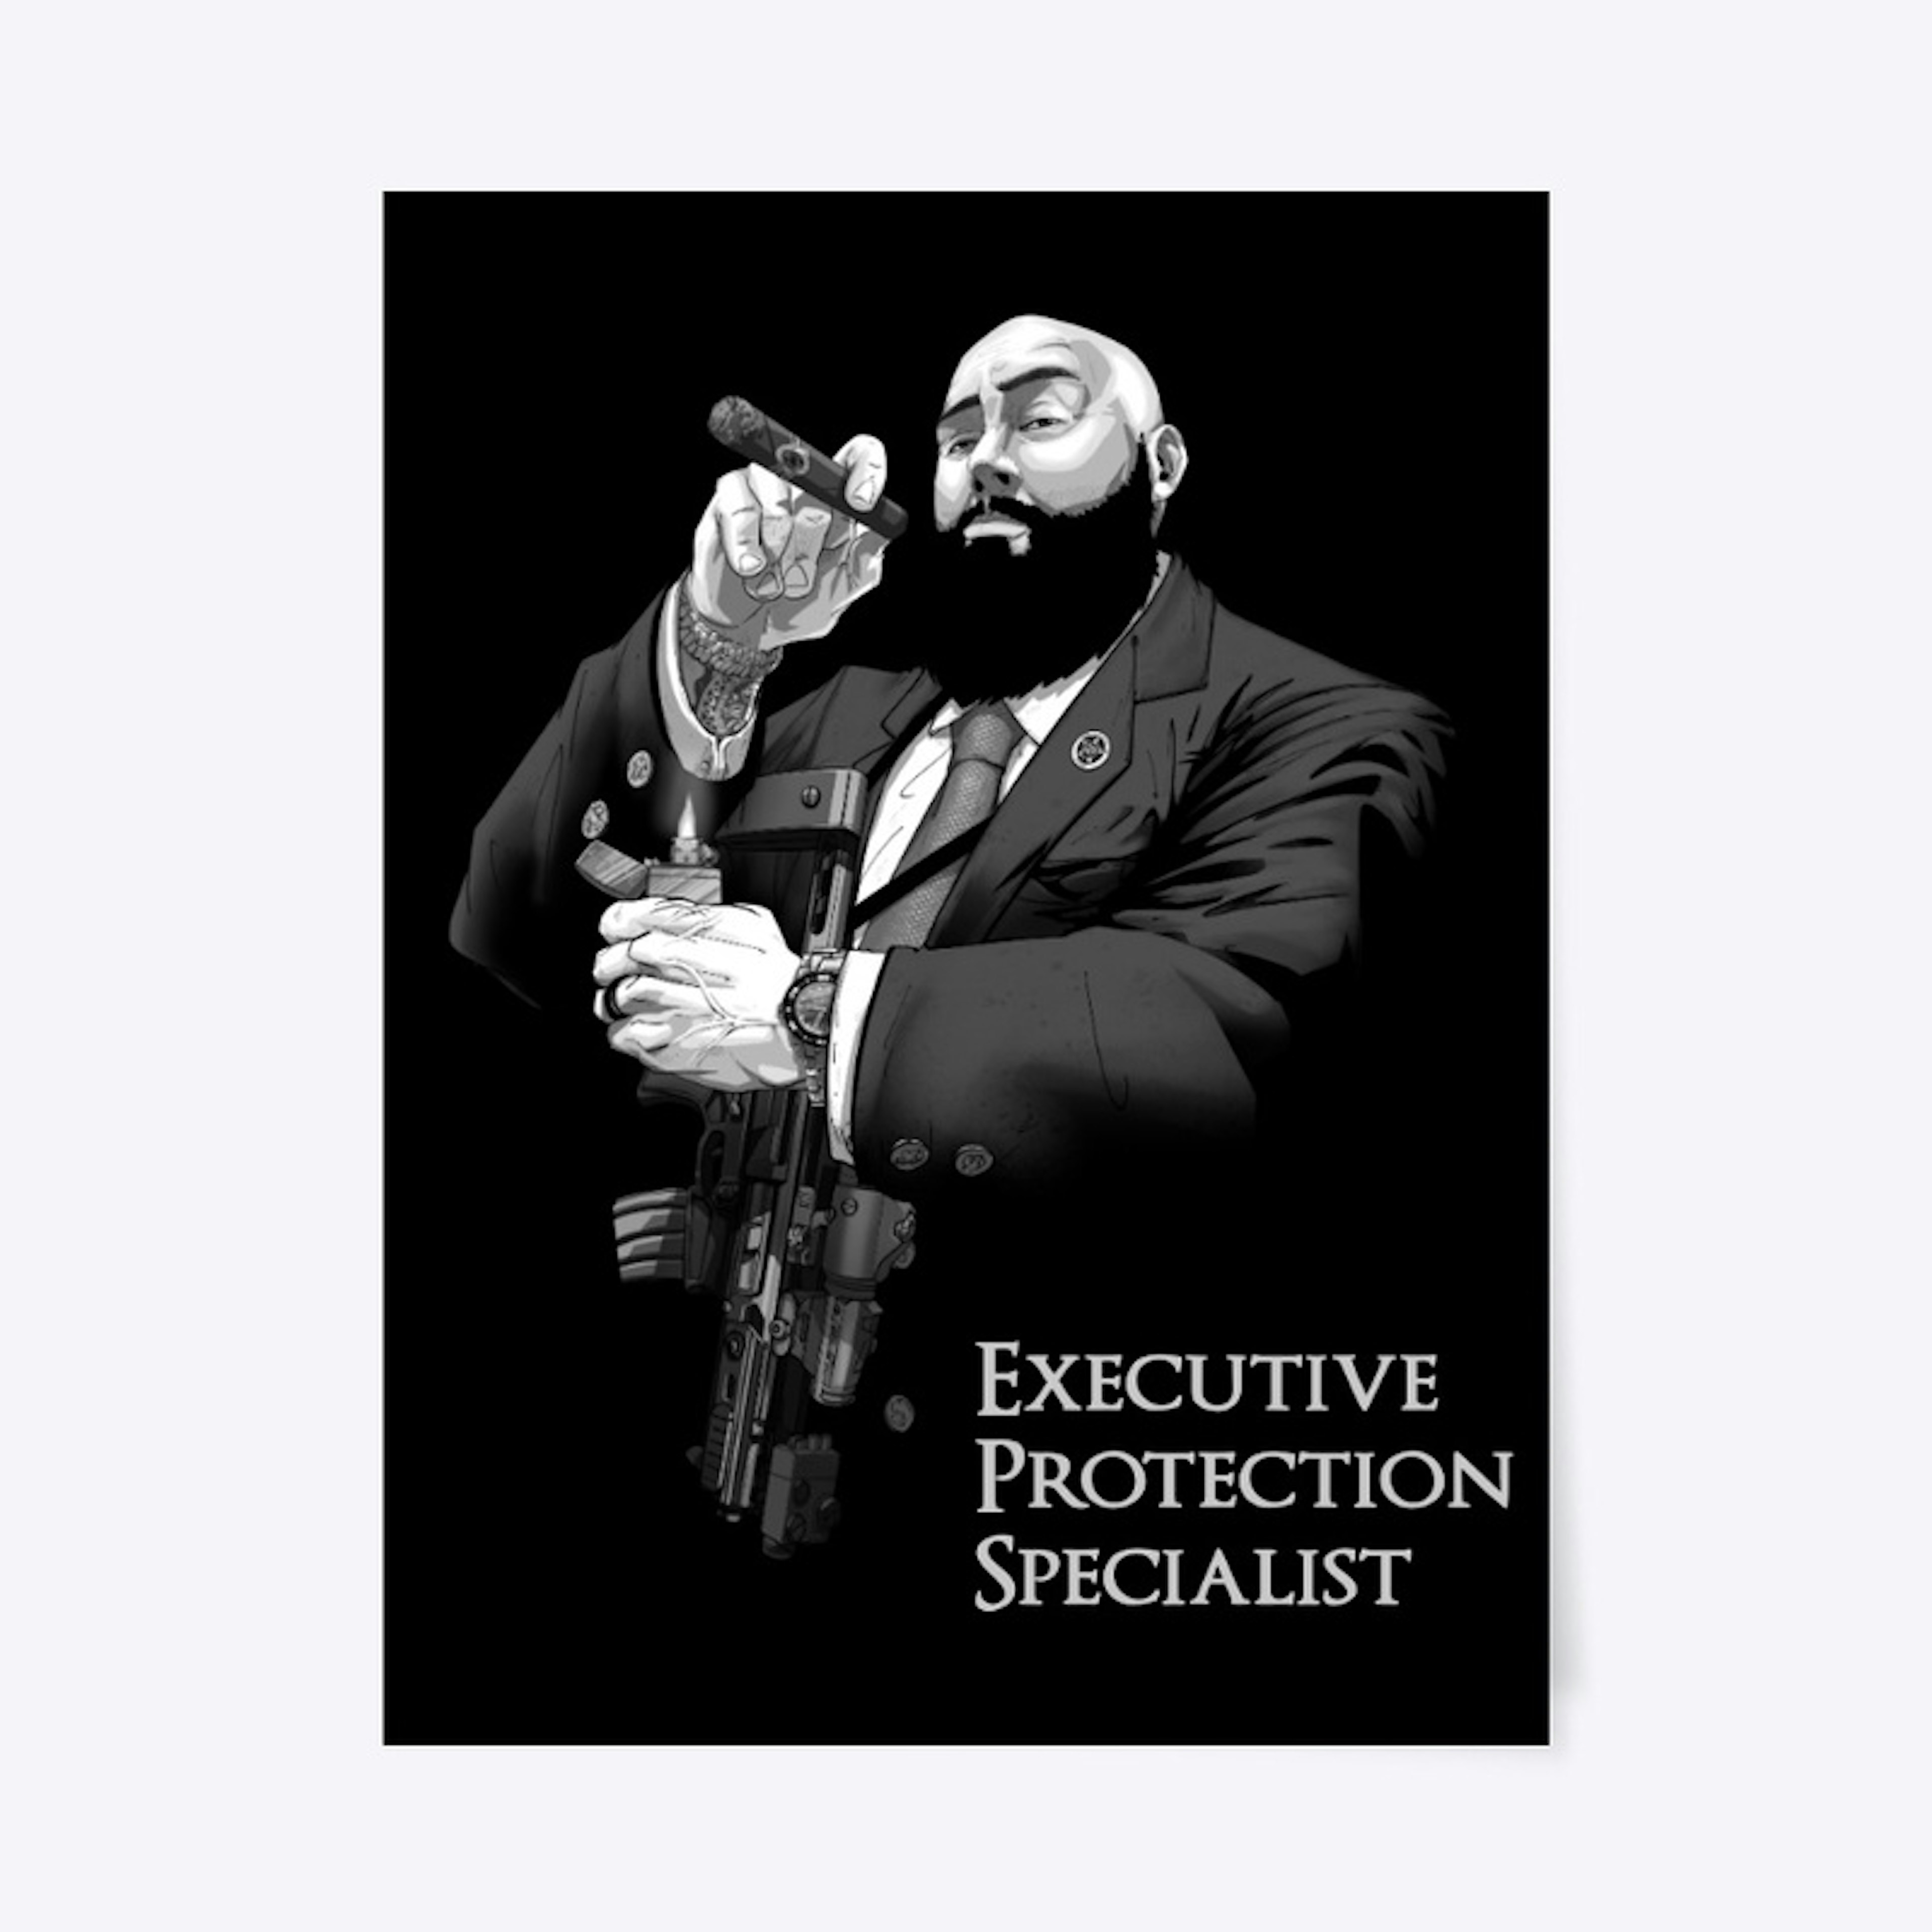 Executive Protection Officer 2022